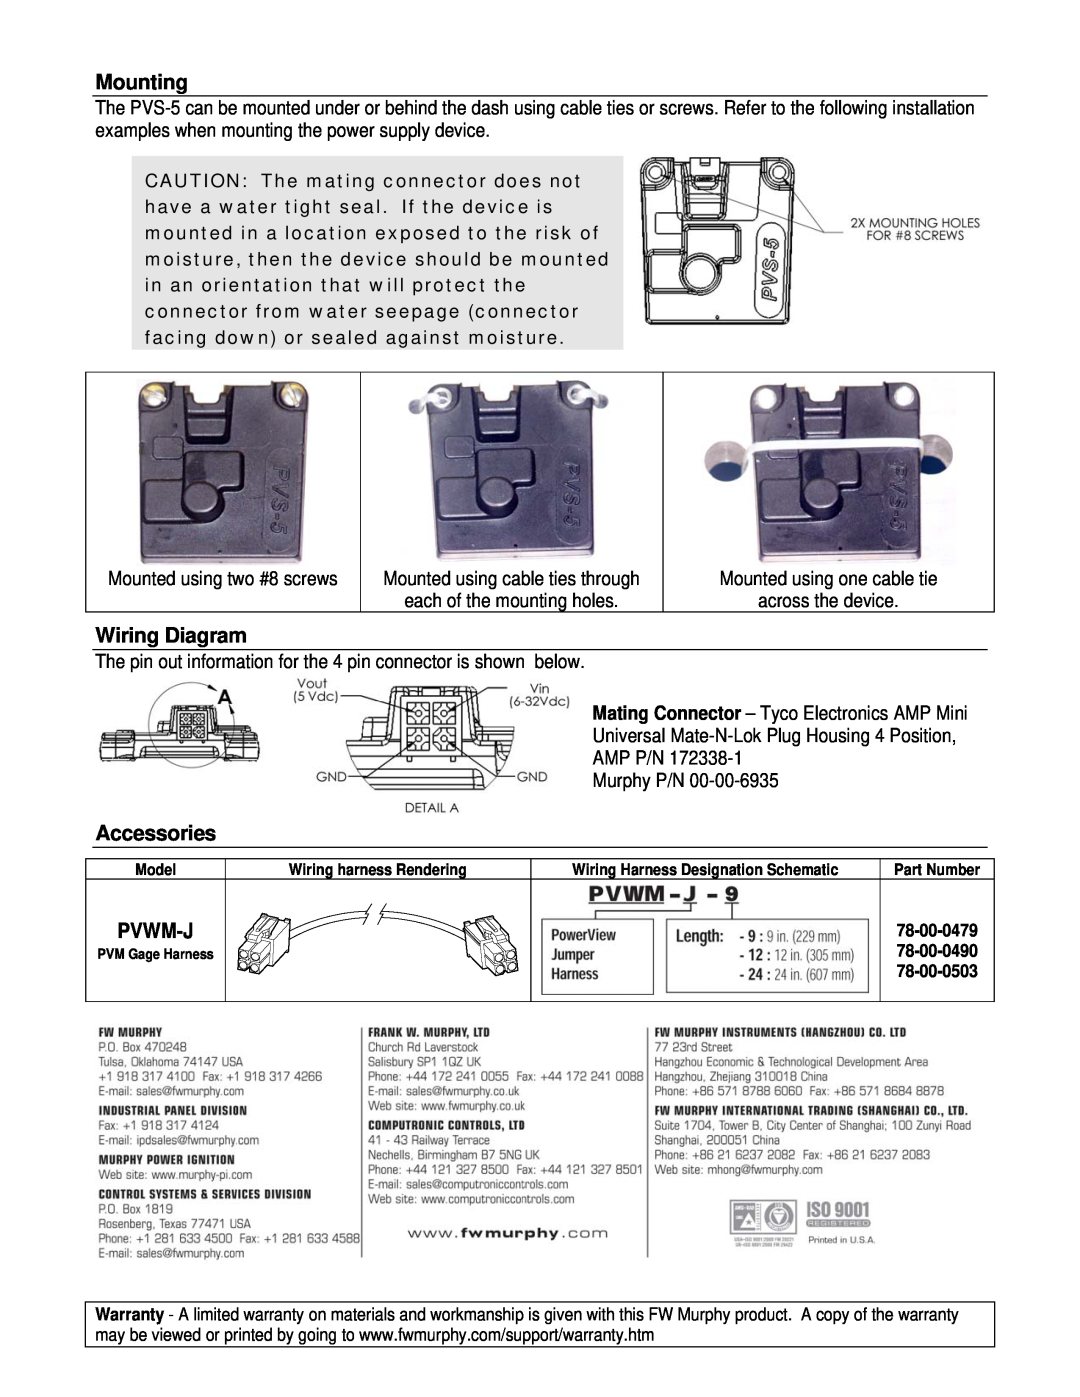 Murphy PVS-5 specifications Mounting, Wiring Diagram, Accessories 